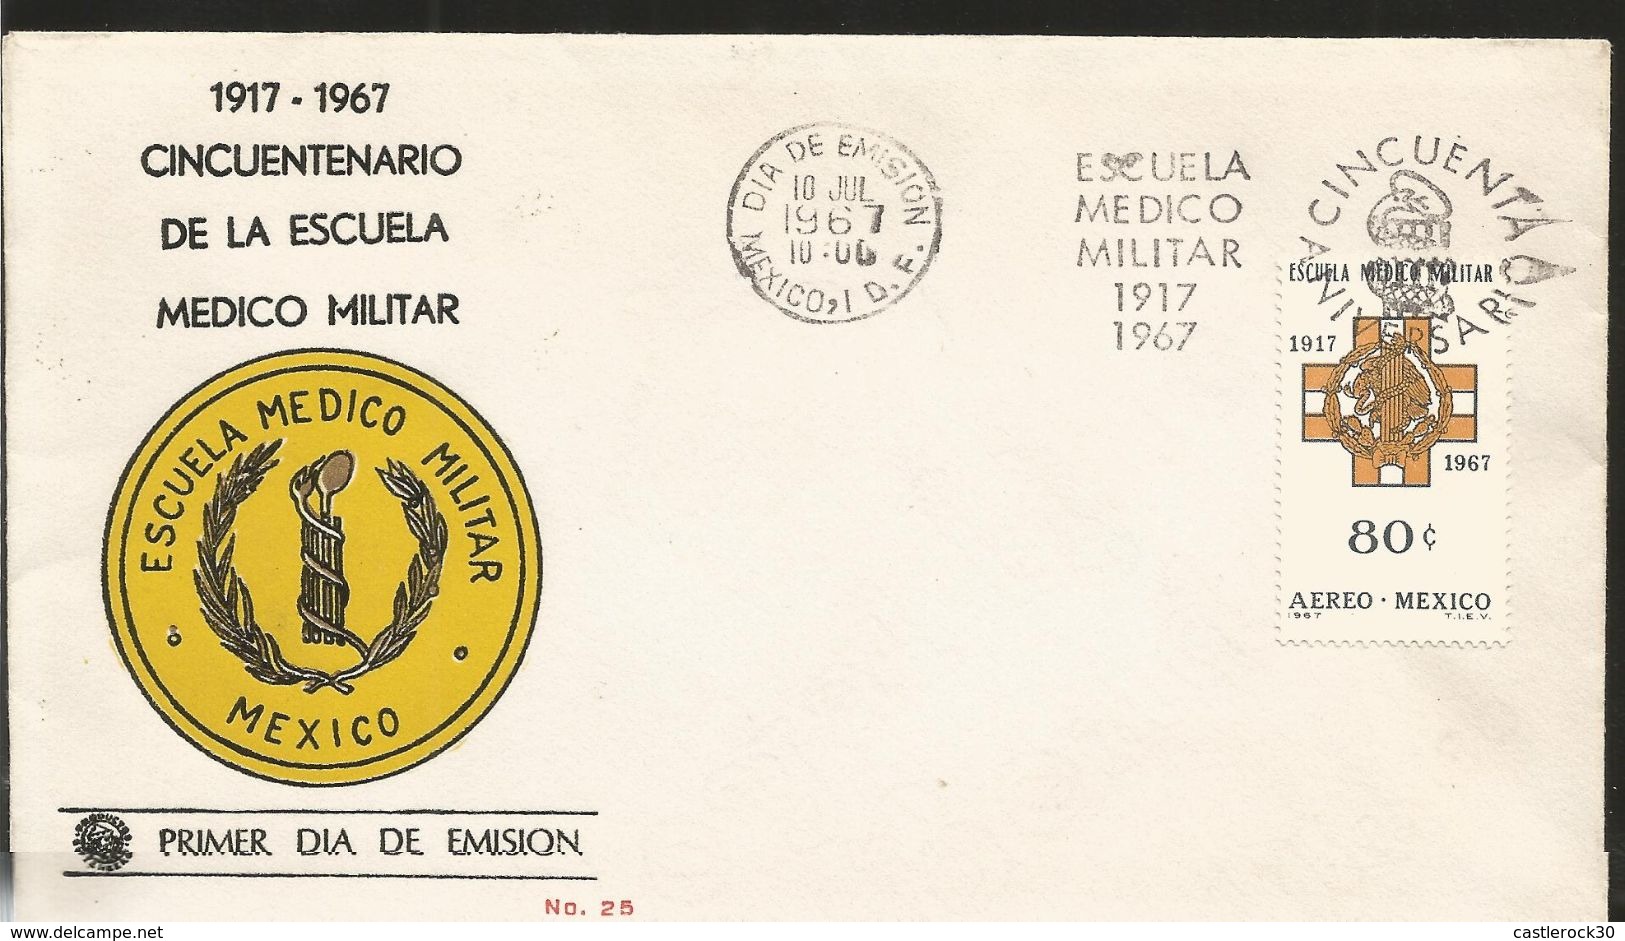 J) 1967 MEXICO, 50TH ANNIVERSARY OF THE MILITARY MEDICAL SCHOOL, EMBLEM, SET OF 6 FDC, 2 MAXIMUM CARD AND 3 FDB